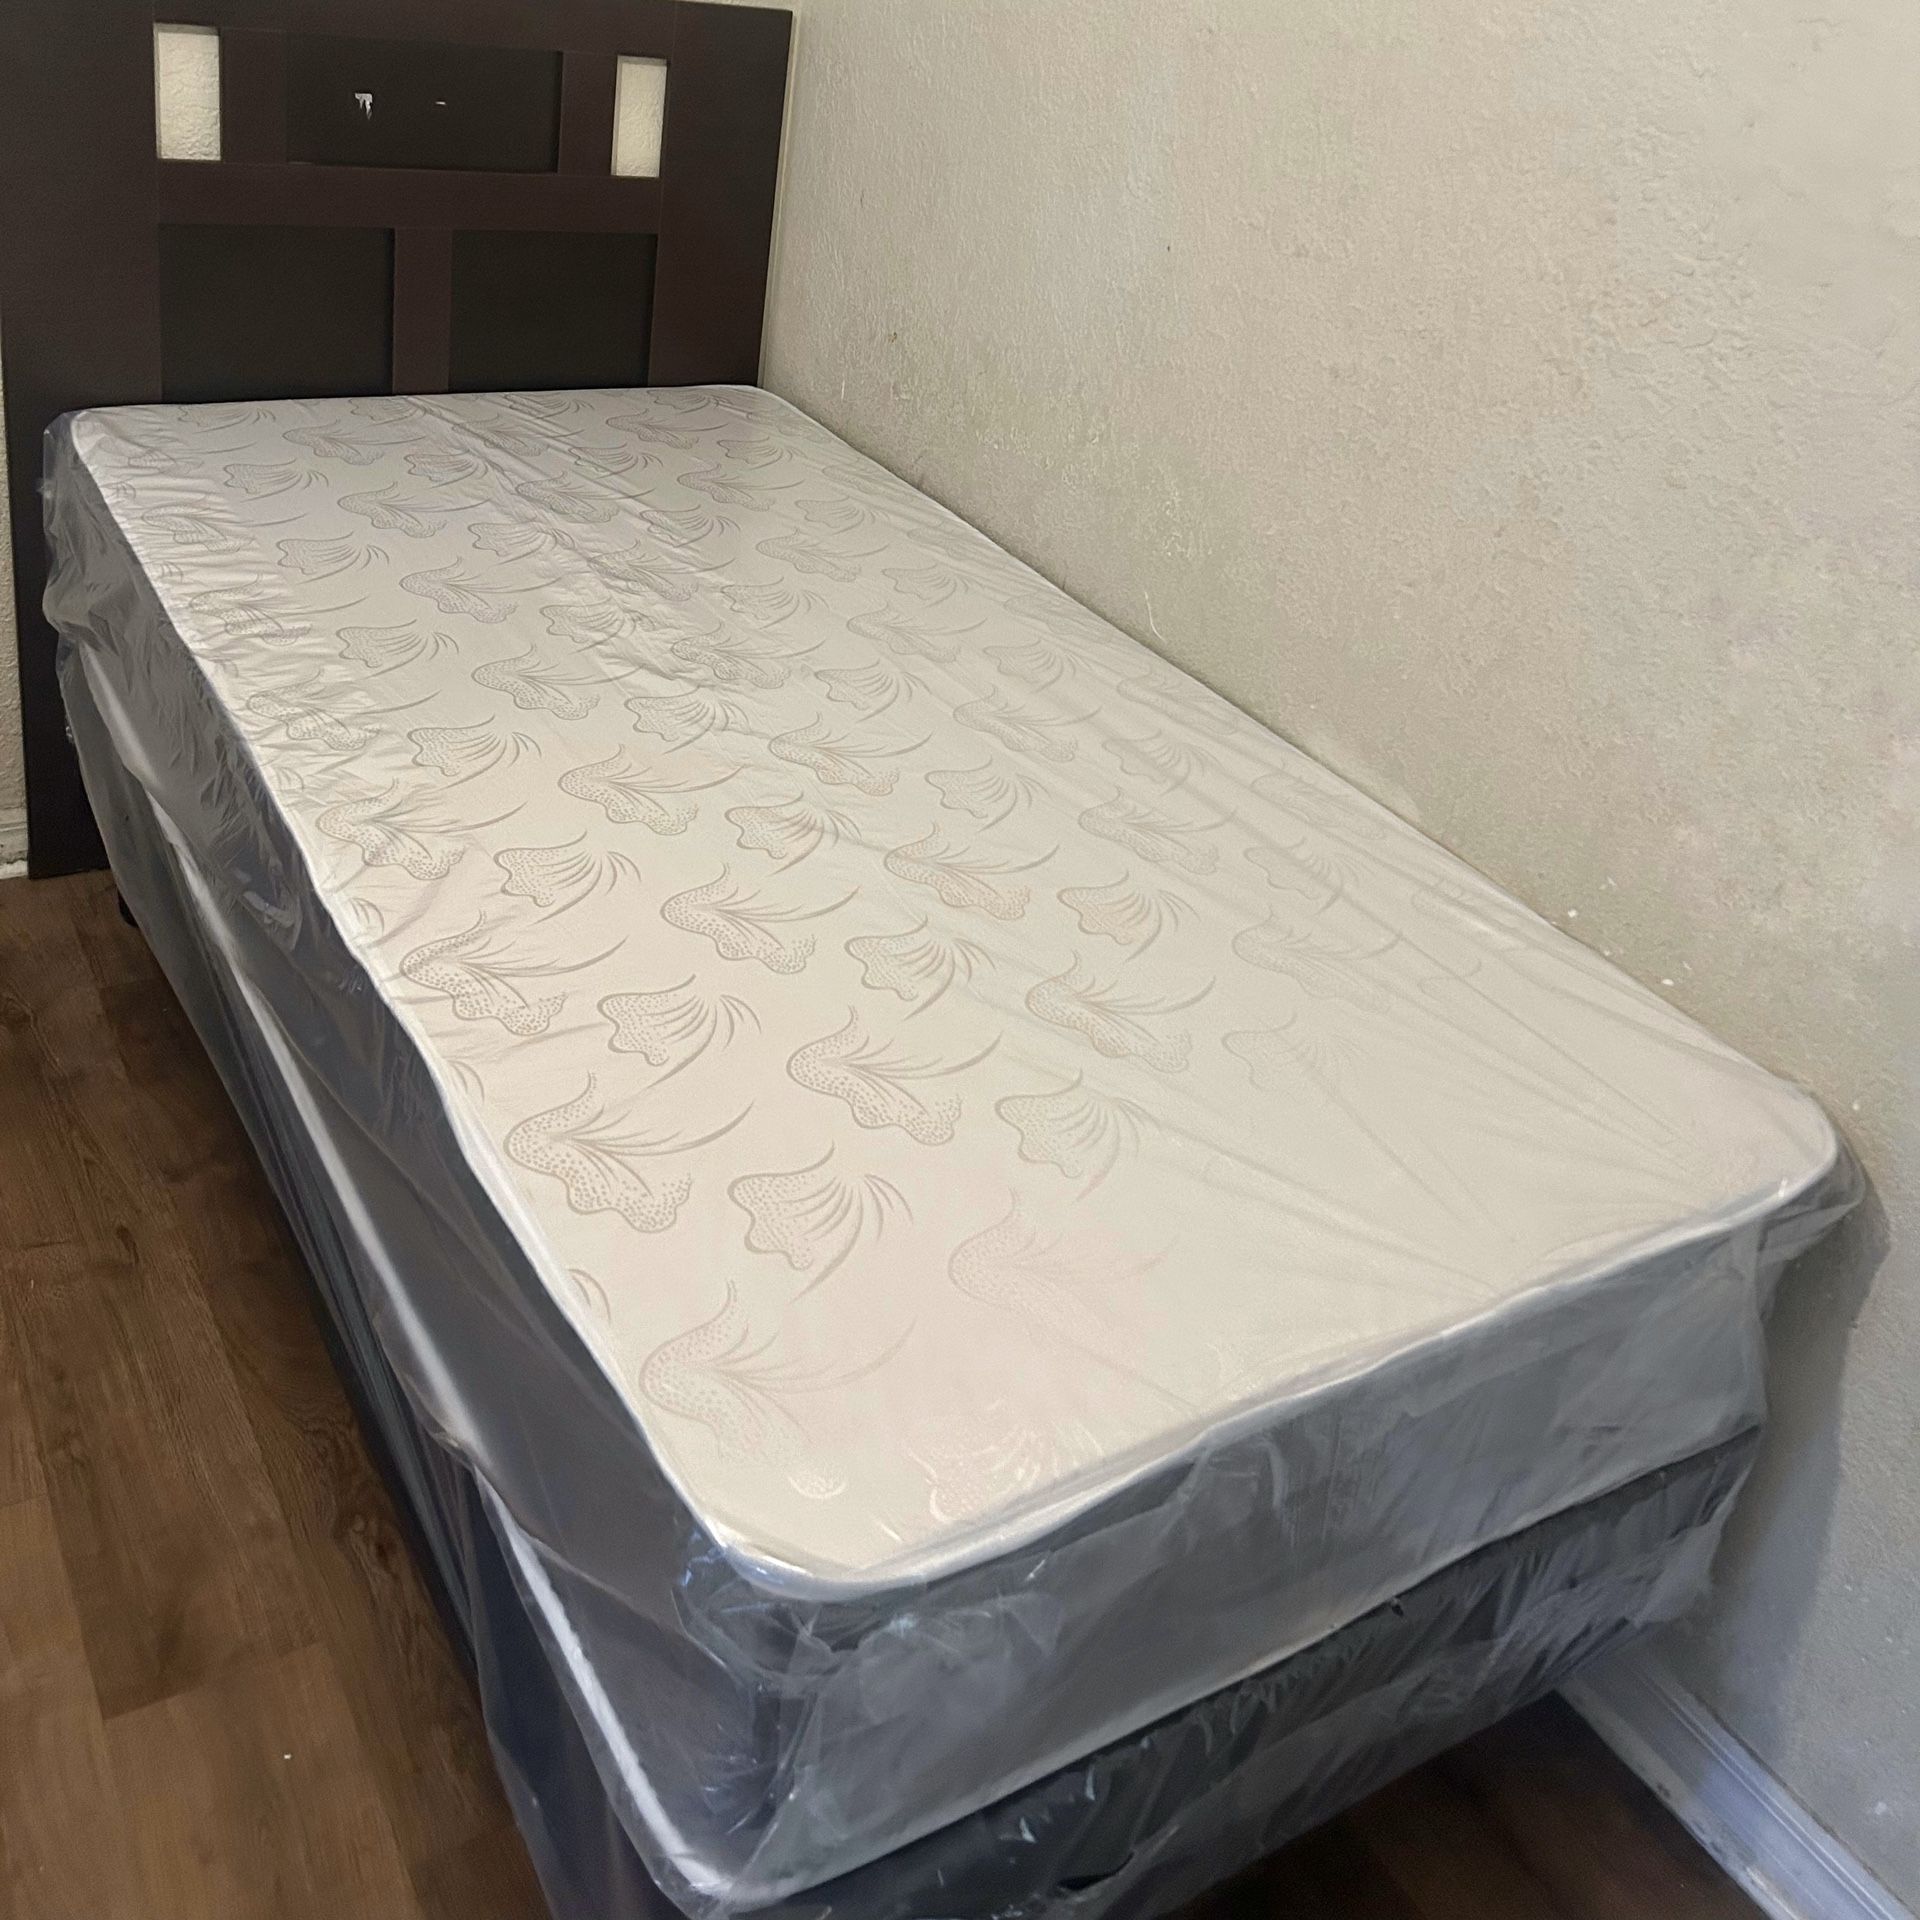 Twin Size Mattress 10” Inches Thick Brand New Available in All Sizes. 🚚 Delivery Same Day